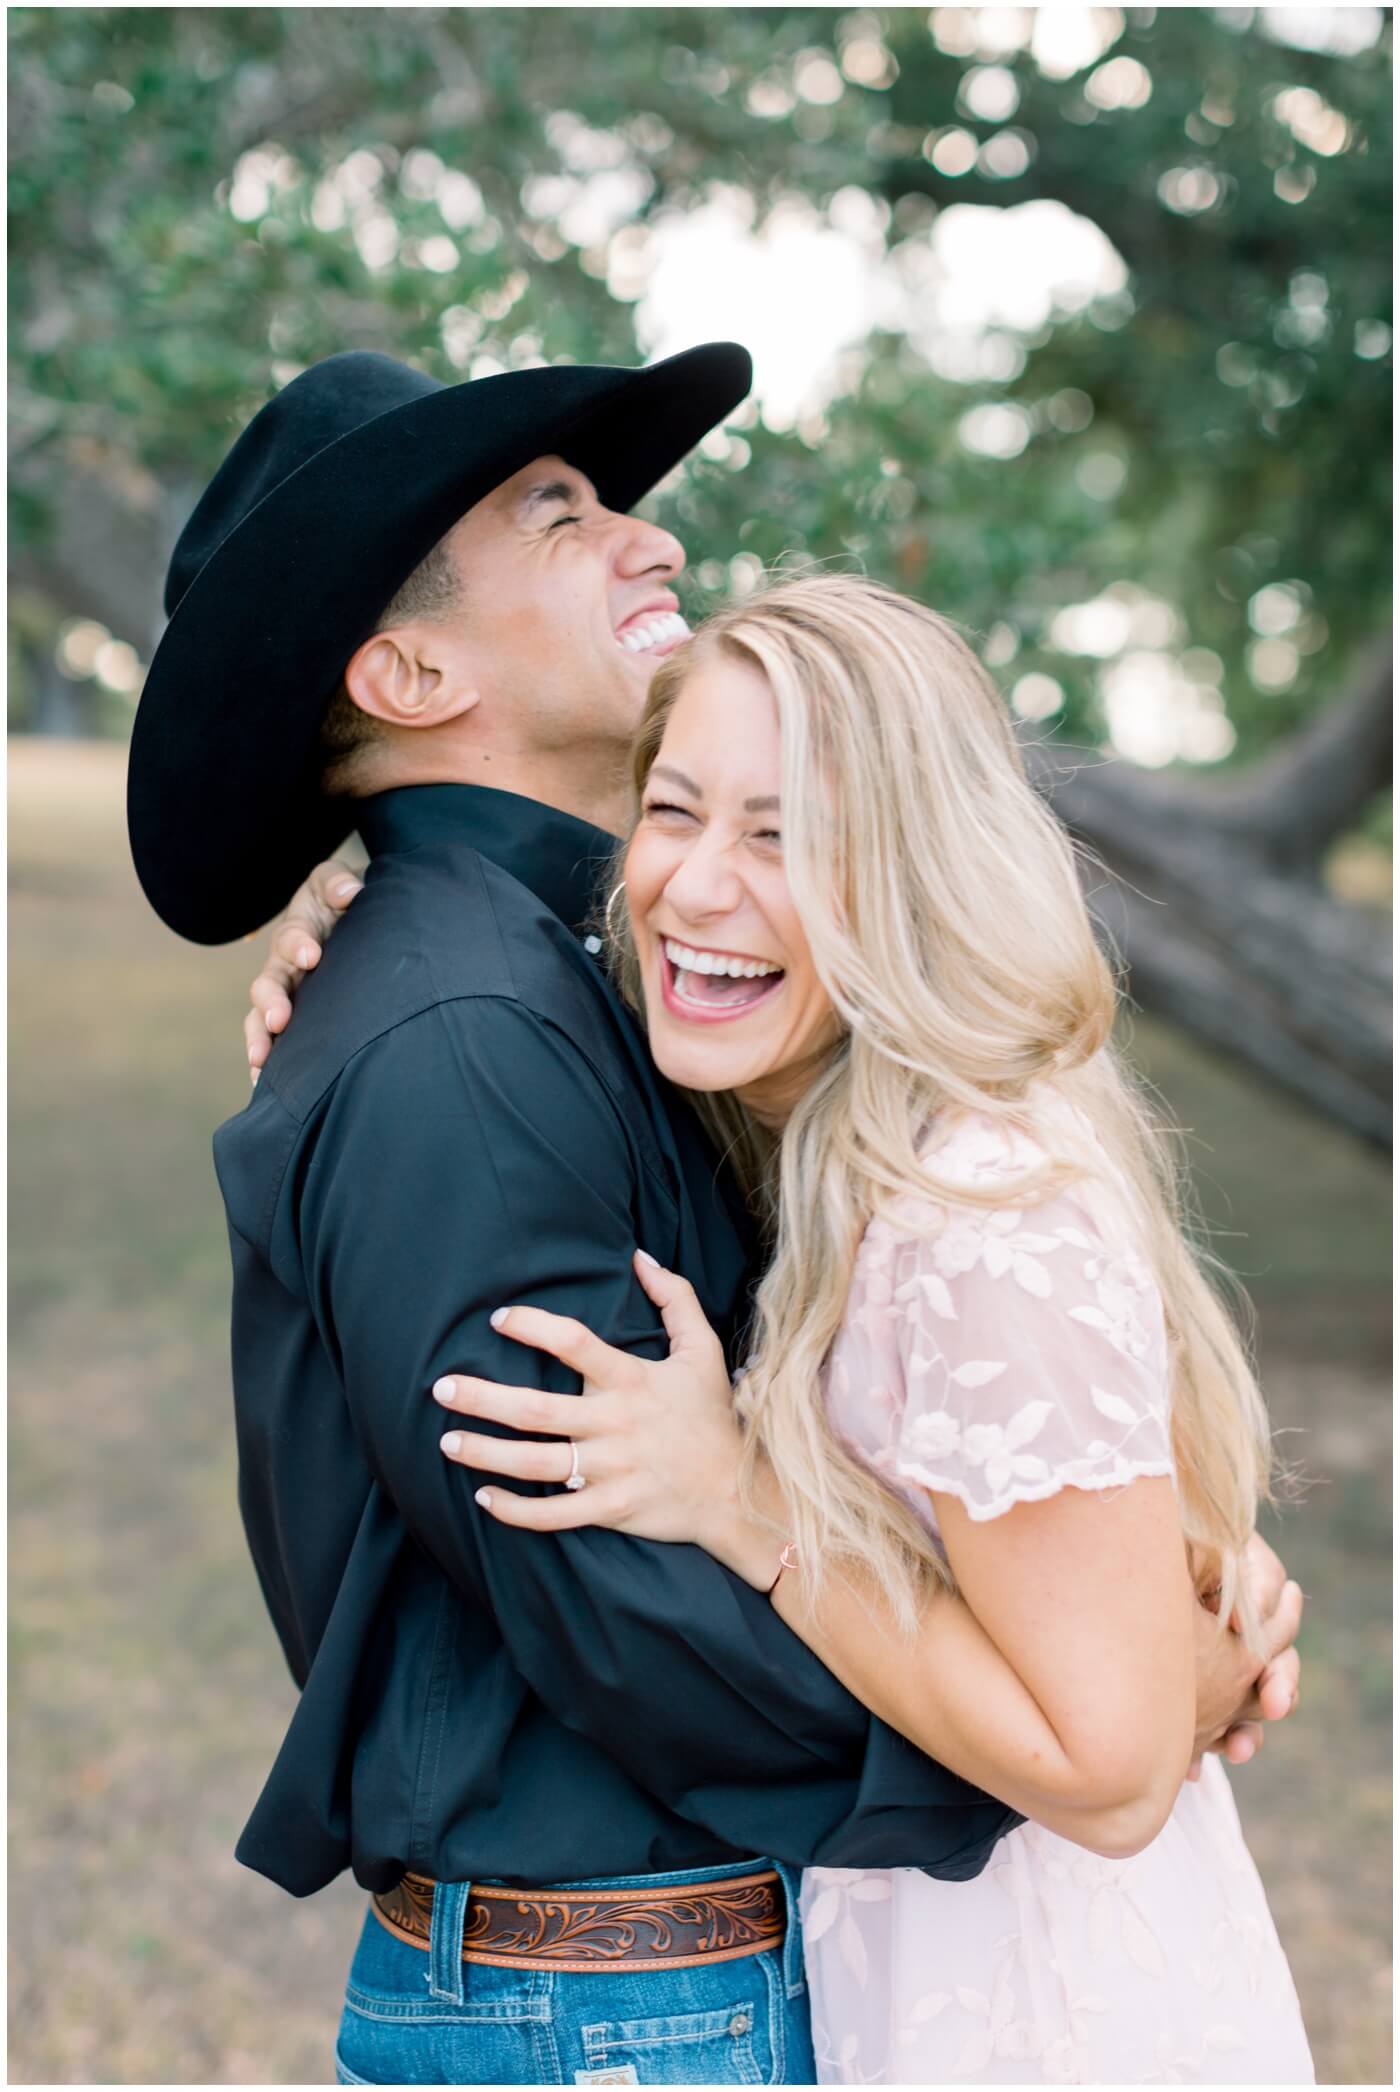 Engagement photos in Houston. A couple laughs together.